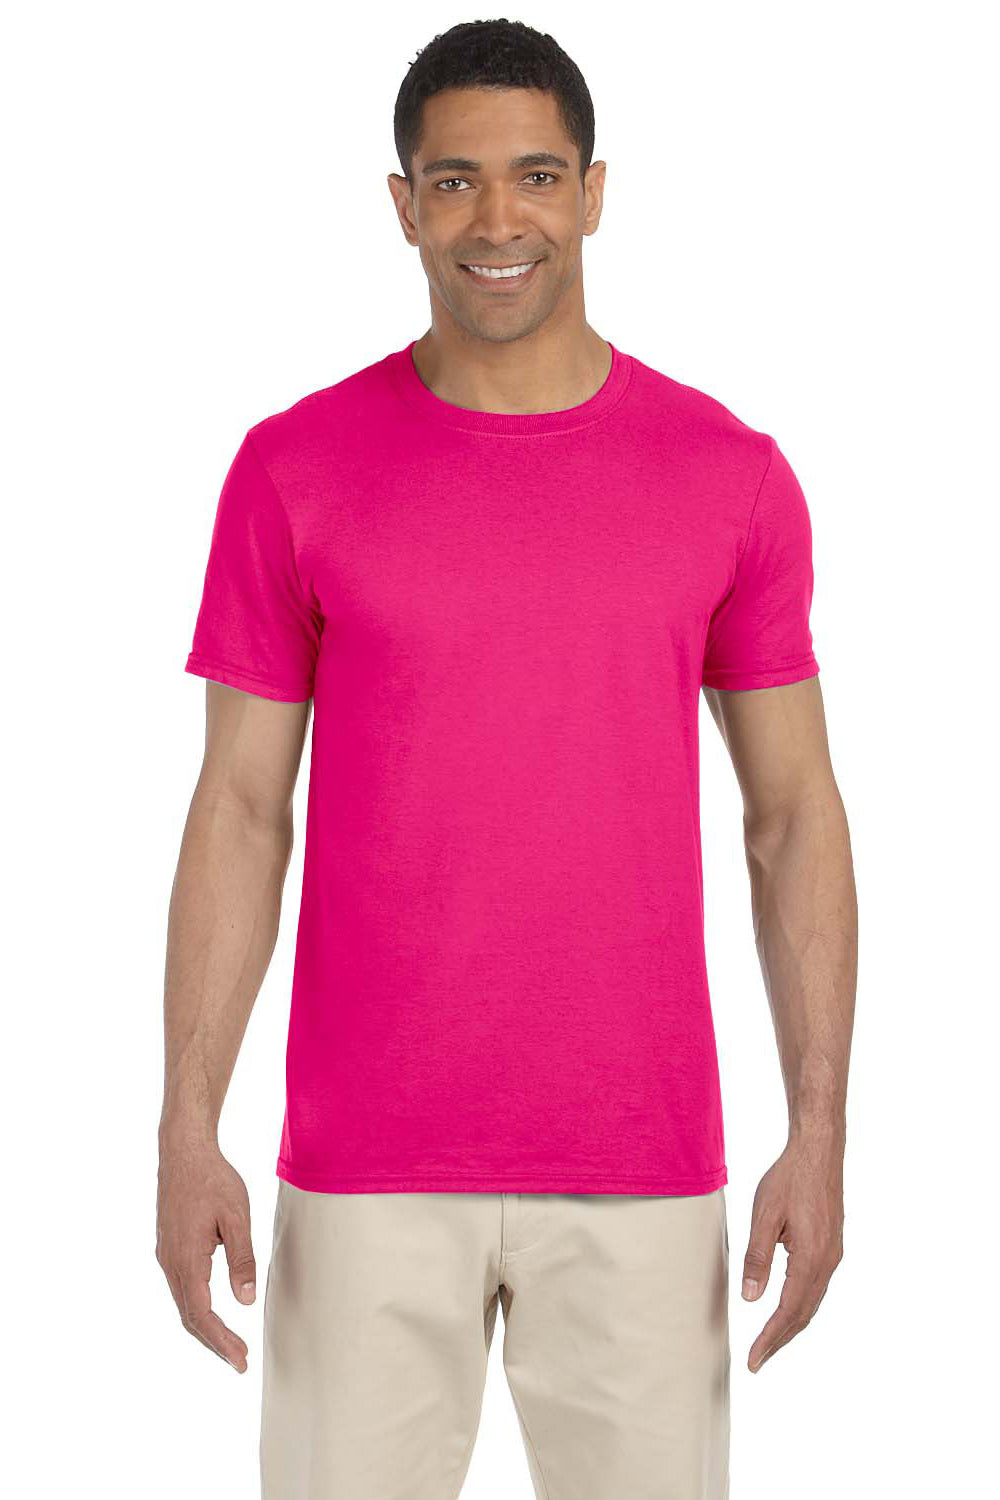 Gildan G640 Mens Softstyle Short Sleeve Crewneck T-Shirt Antique Heliconia Pink Front